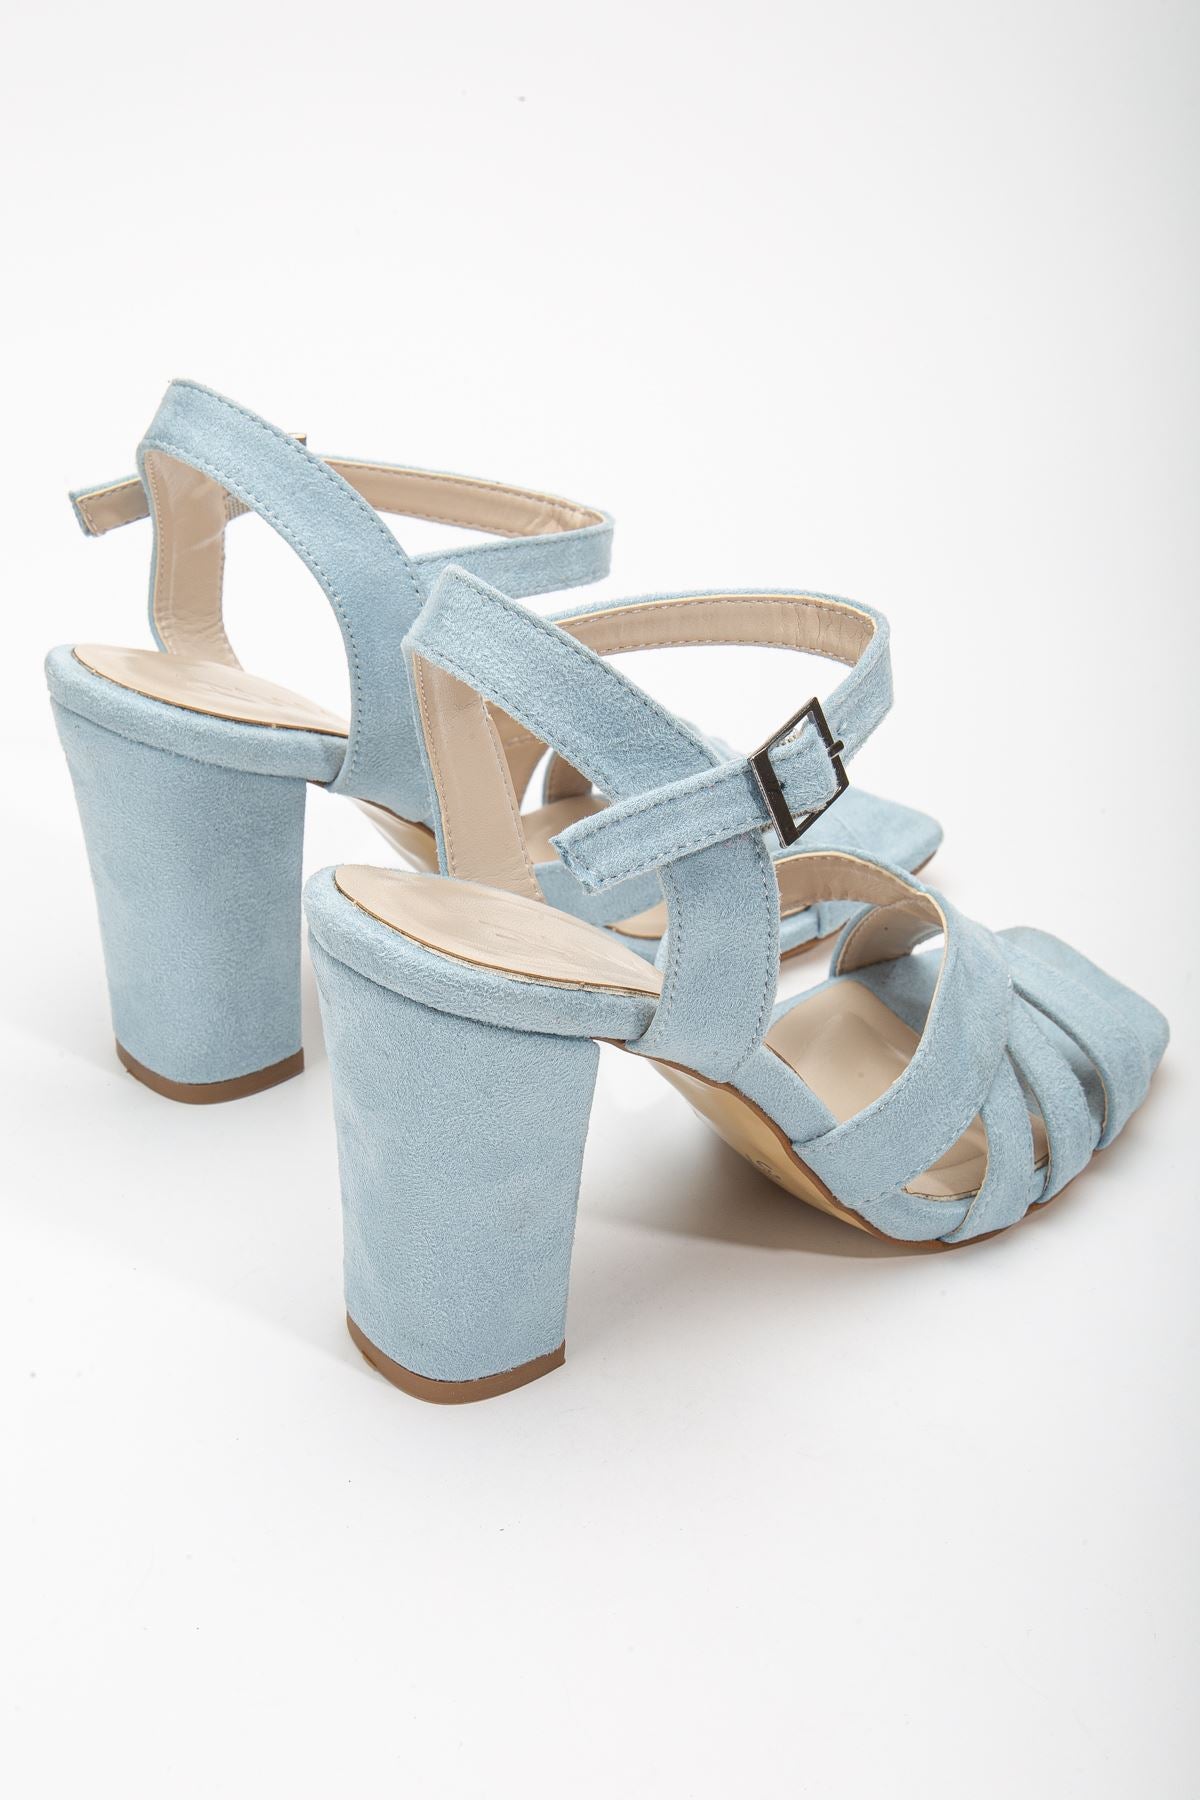 Hope High Heeled Baby Blue Suede Blunt Toe Women's Shoes - STREETMODE™